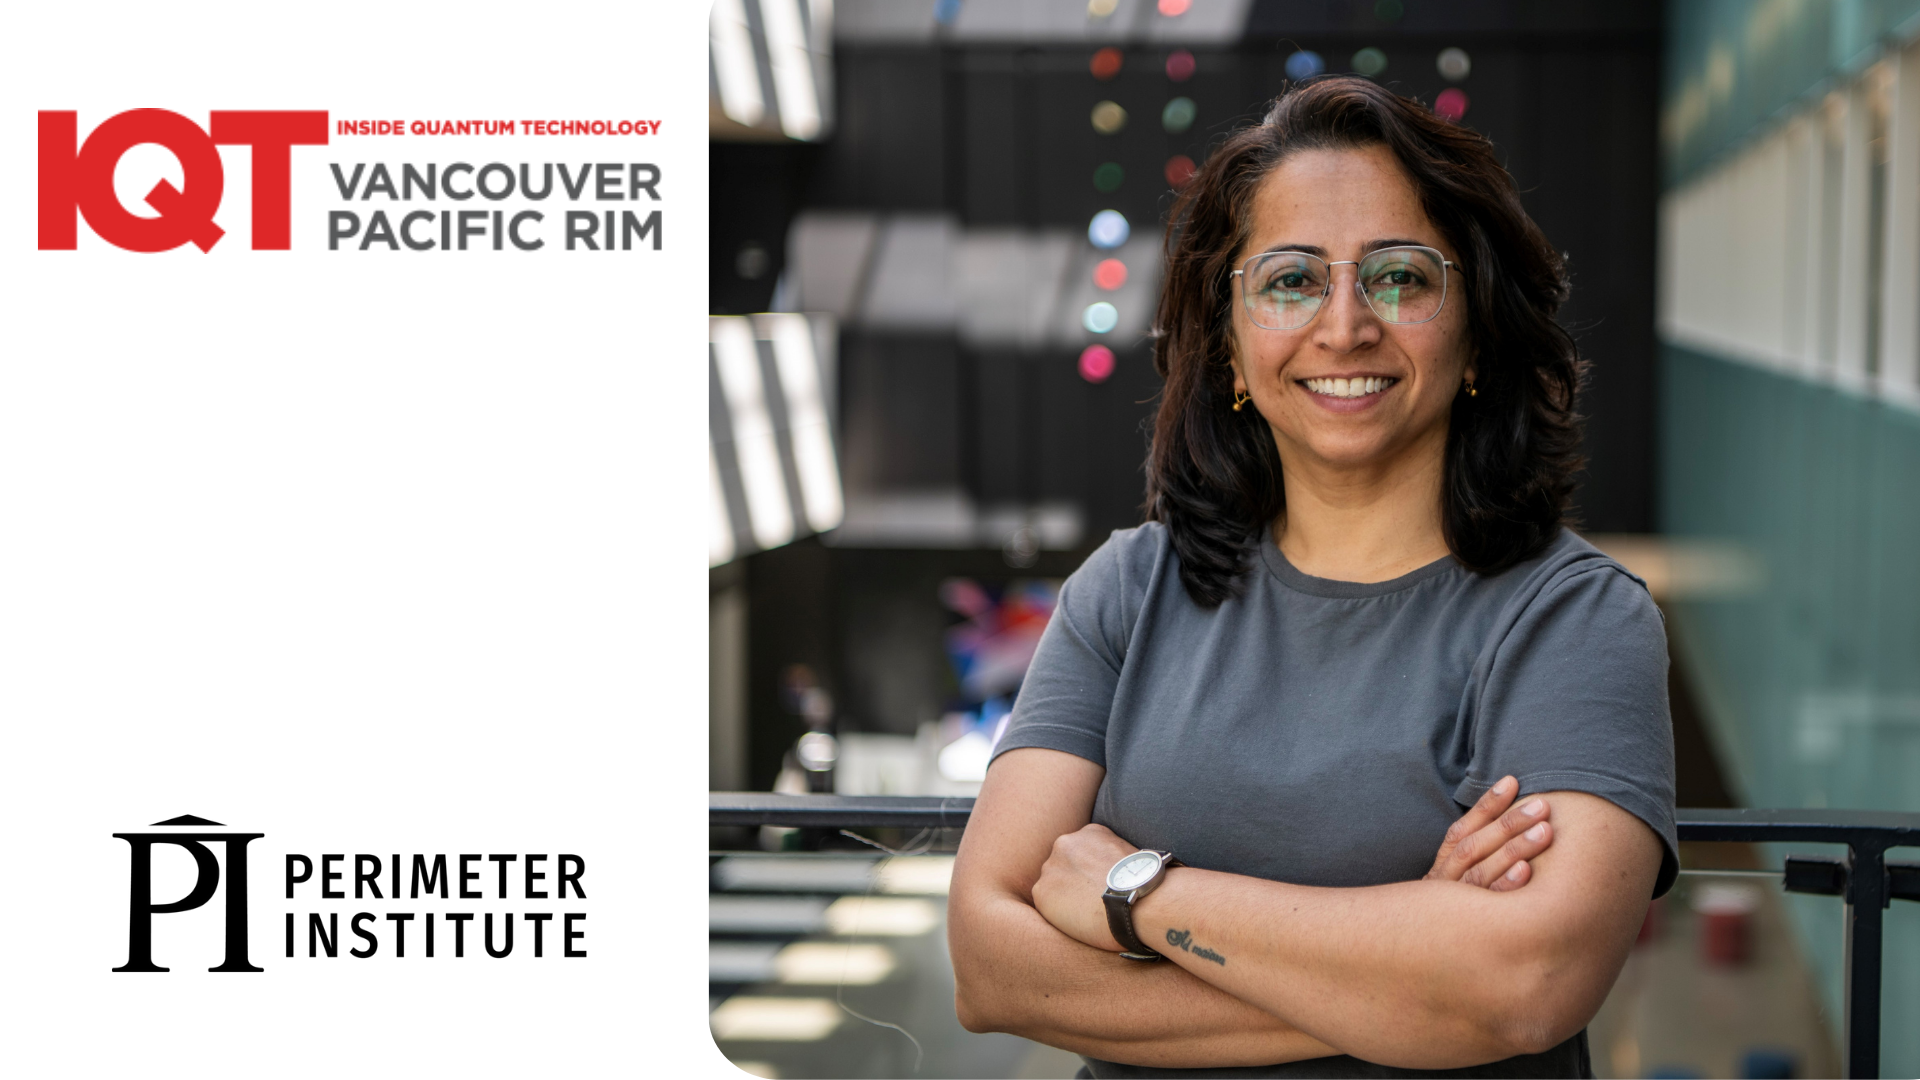 Bindiya Arora, PSI Fellow at the Perimeter Institute, is a speaker for the IQT Vancouver/Pacific Rim conference in June 2024